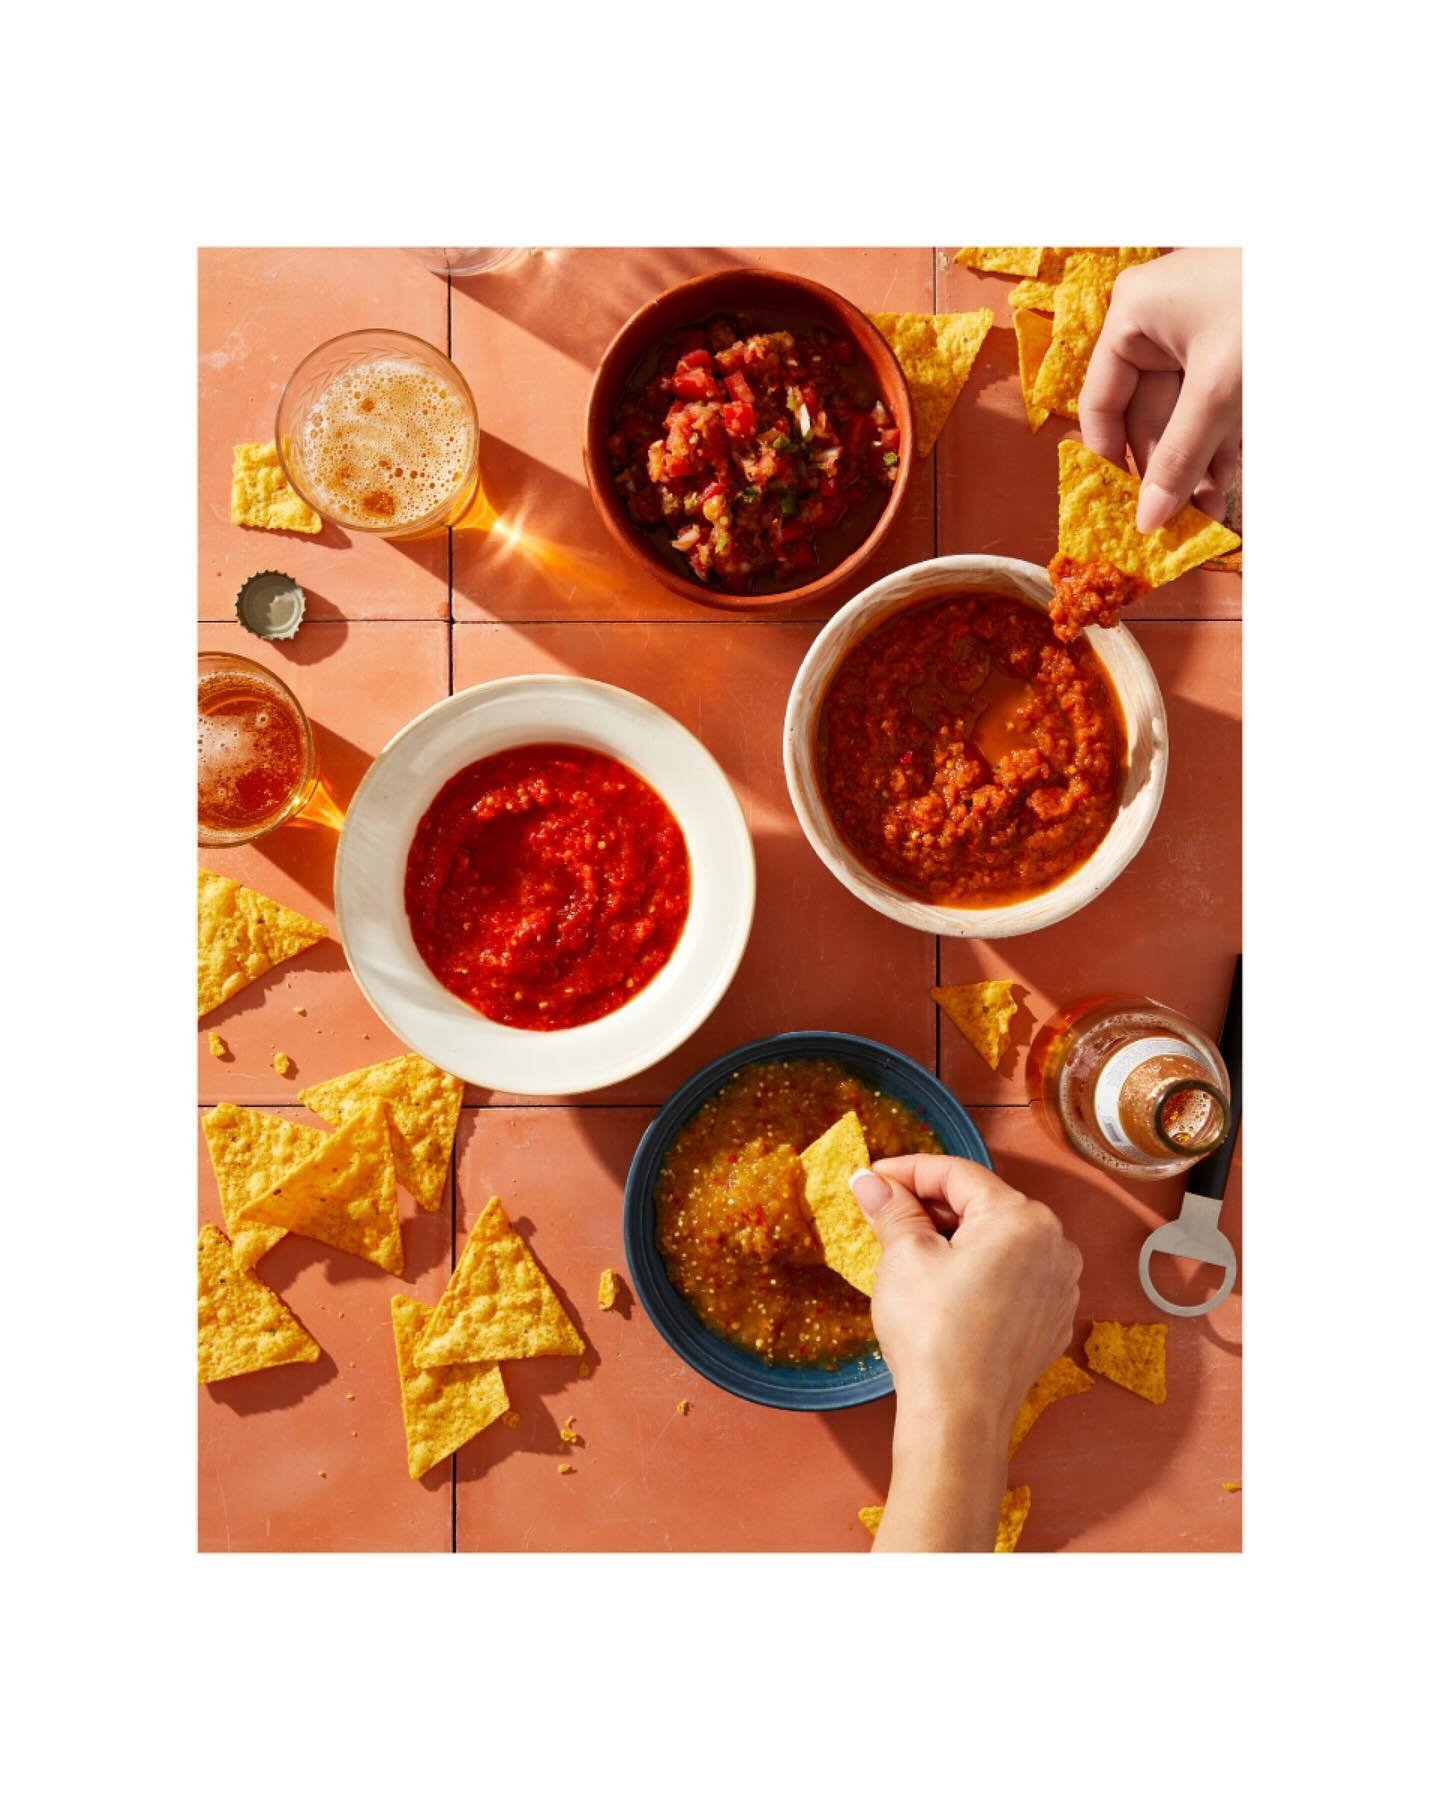 More from @happybelliesbyjenny My Mexican Mesa - 

Food Stylist @laurakinsey
Prop Stylist @stephaniehanes

Photo assistant @davidkoungphoto
1st food assistant @sweet_d_nyc
2nd food assistant @not.courtney @beeberriefood @elle_debell
Prop assistant @a